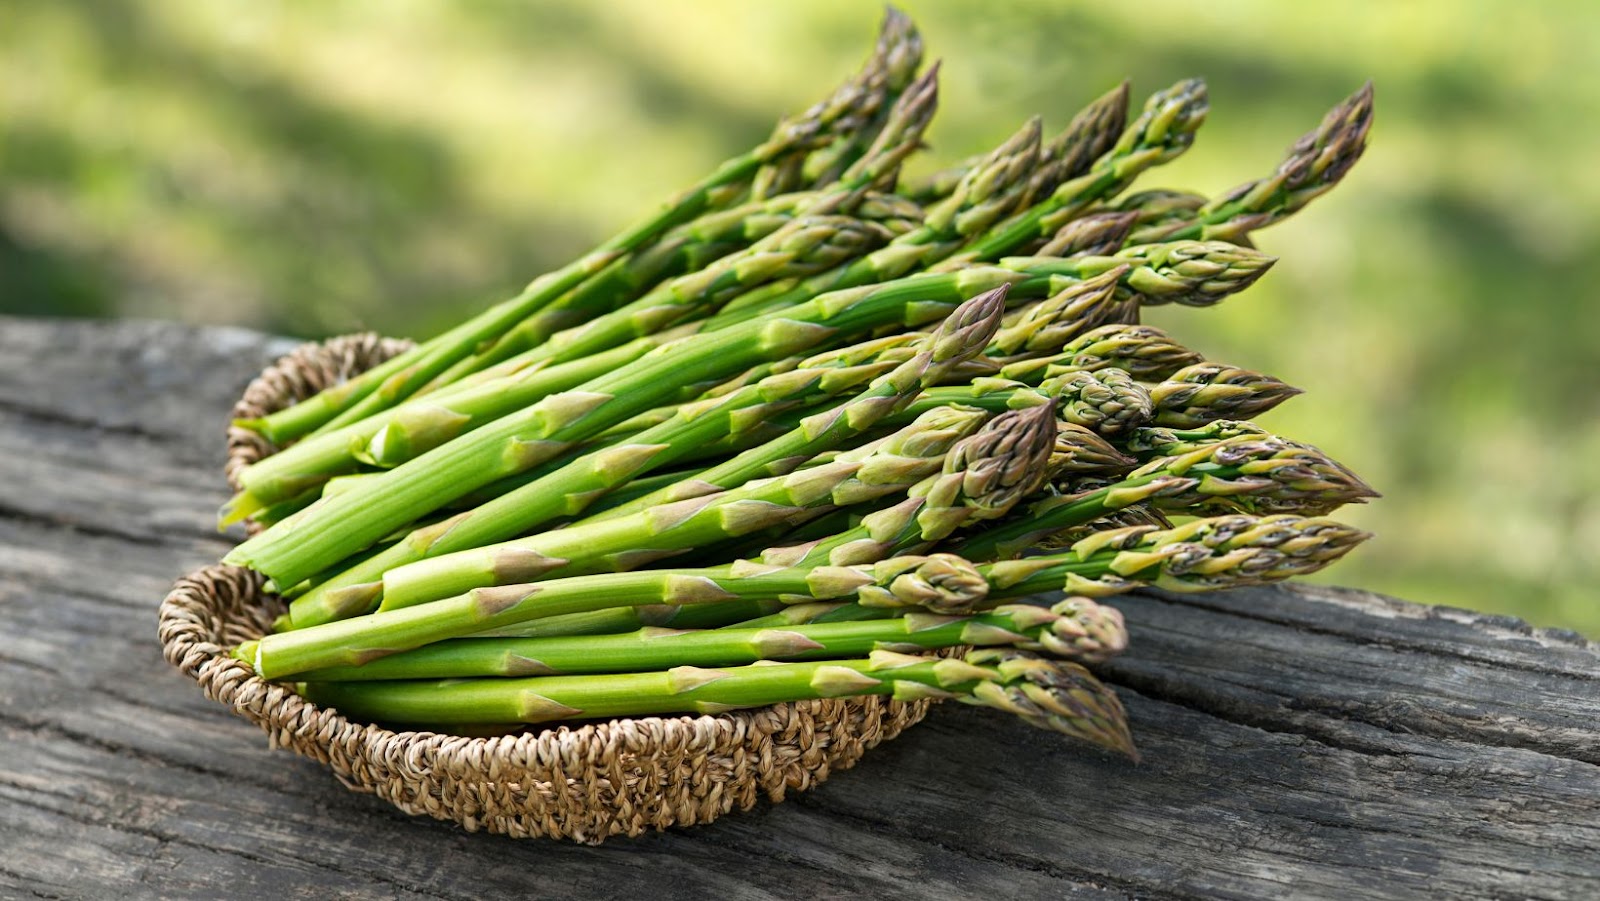 FAQs about Asparagus and Dogs